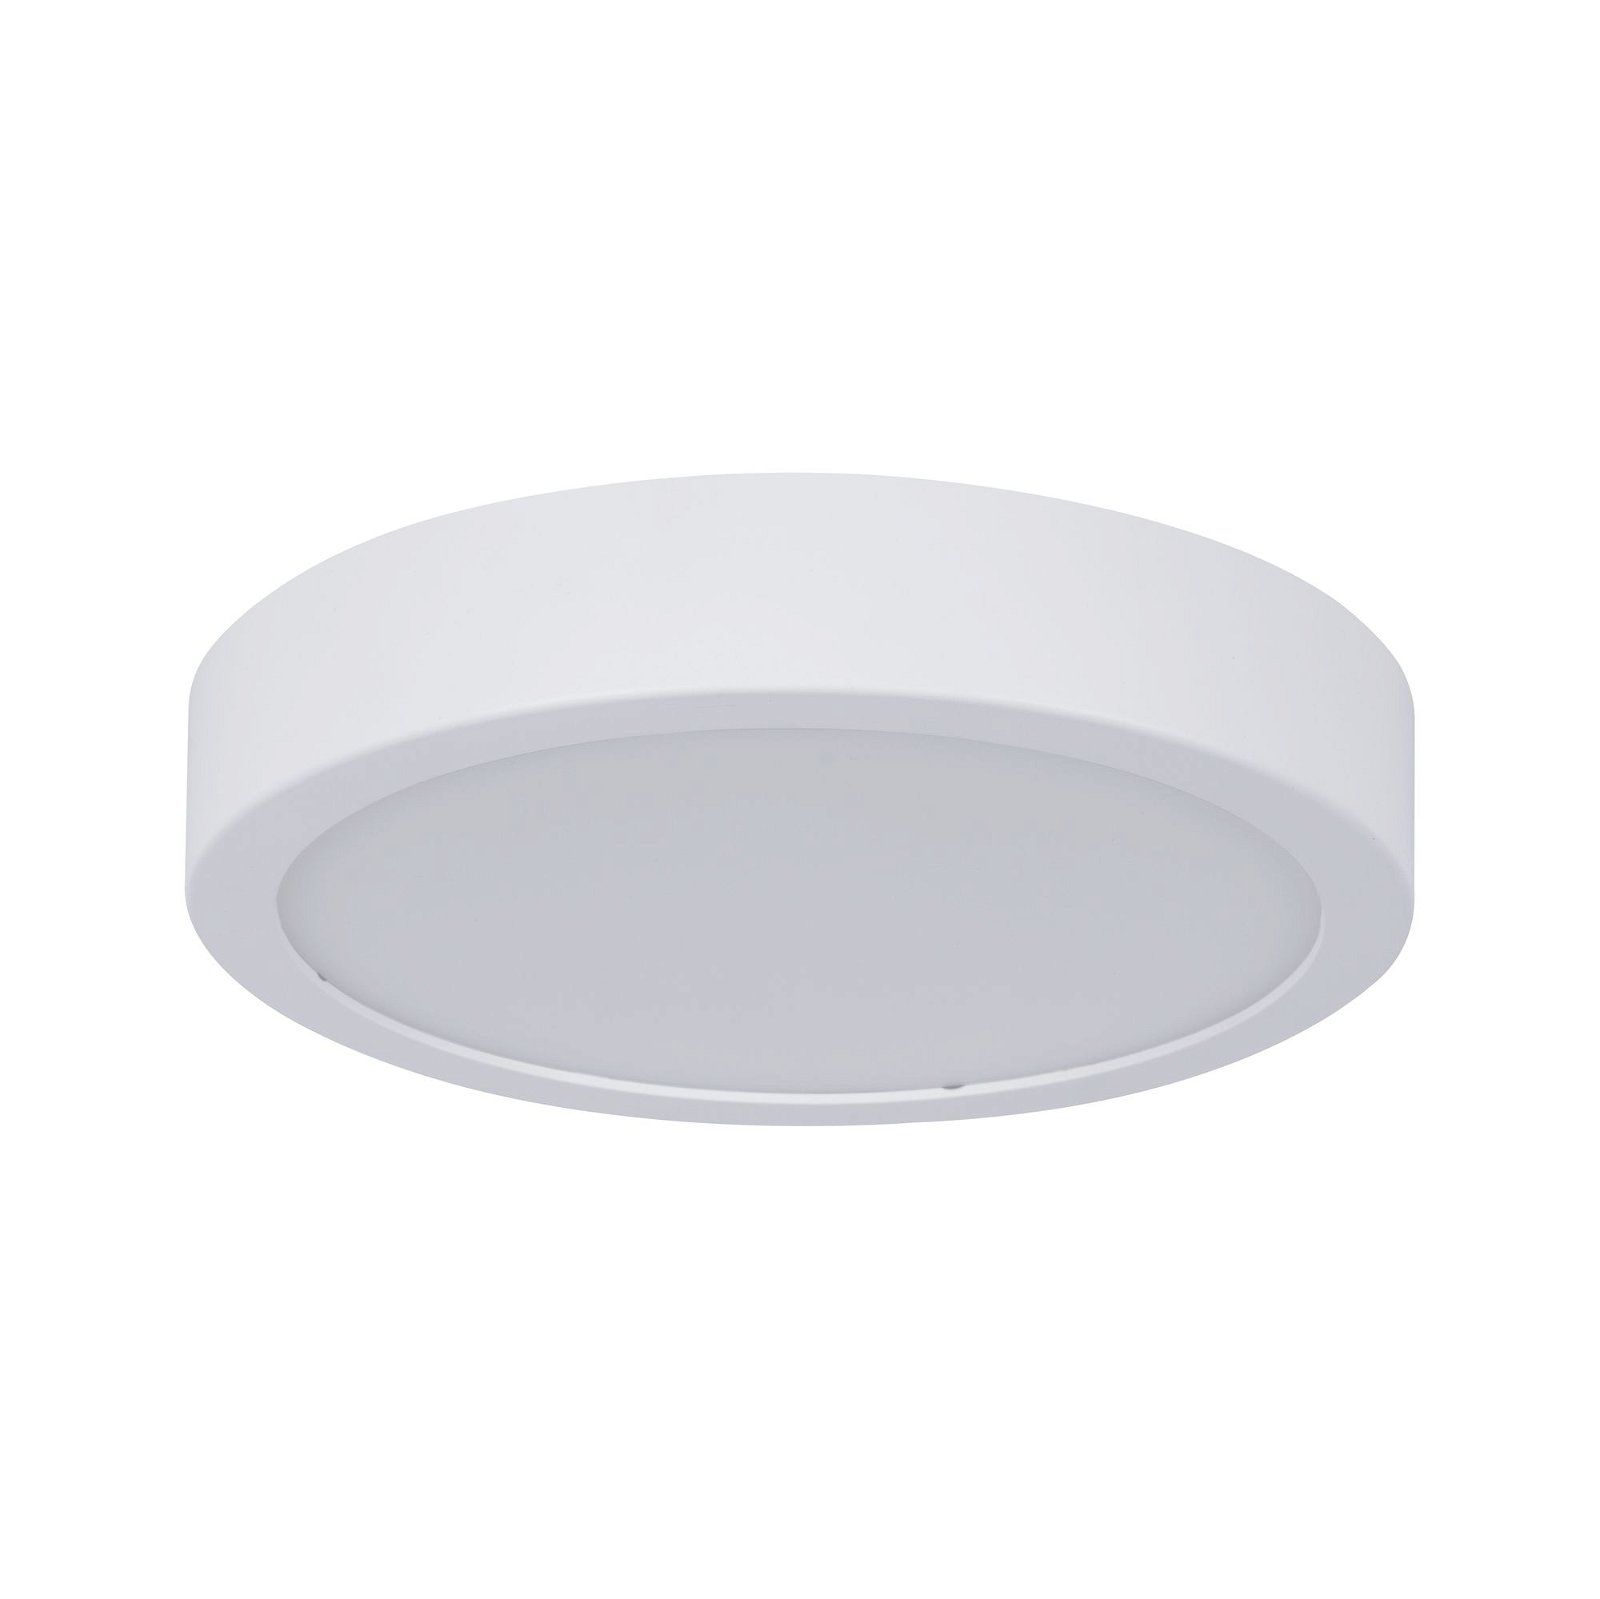 LED Panel Aviar IP44 round 220mm 13W 950lm 4000K White dimmable